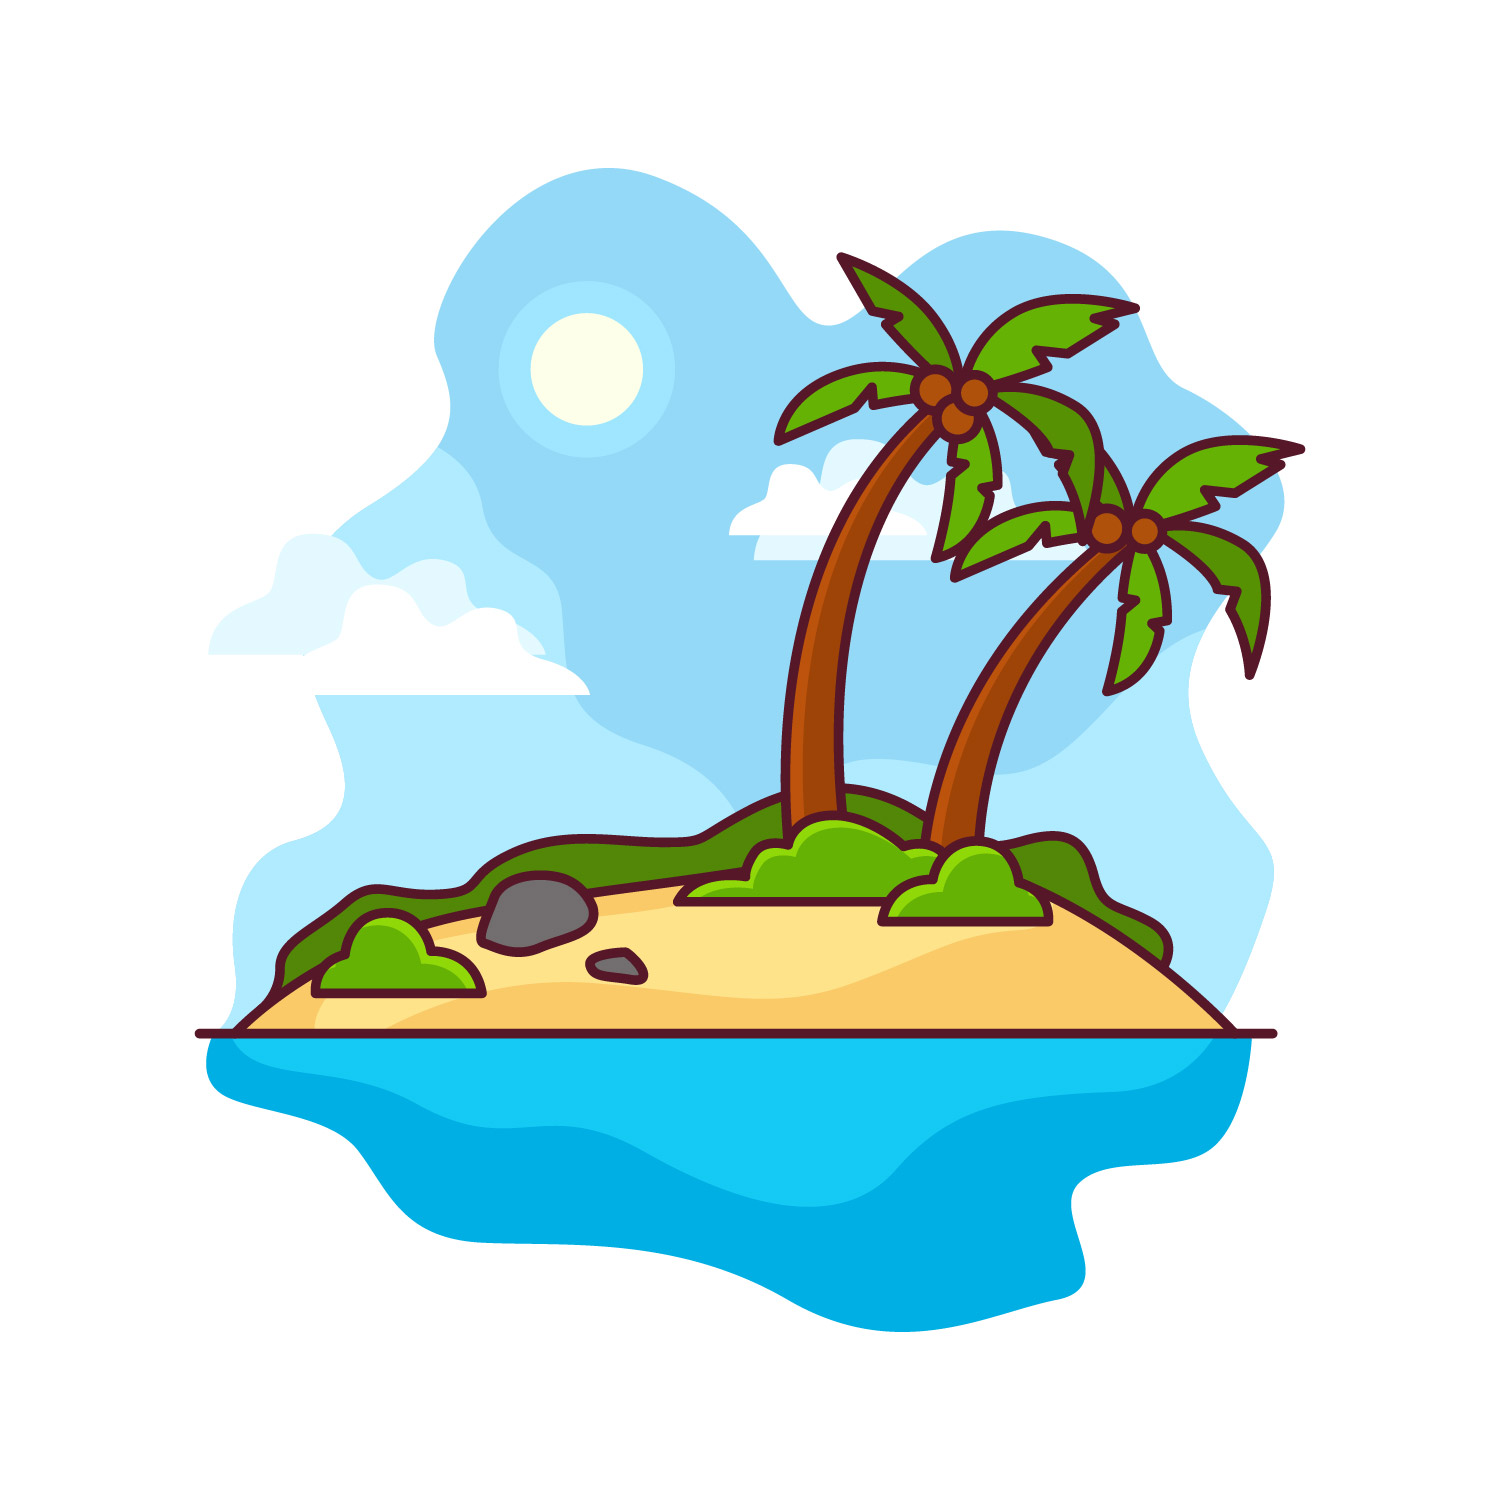 Deserted Island Cliparts